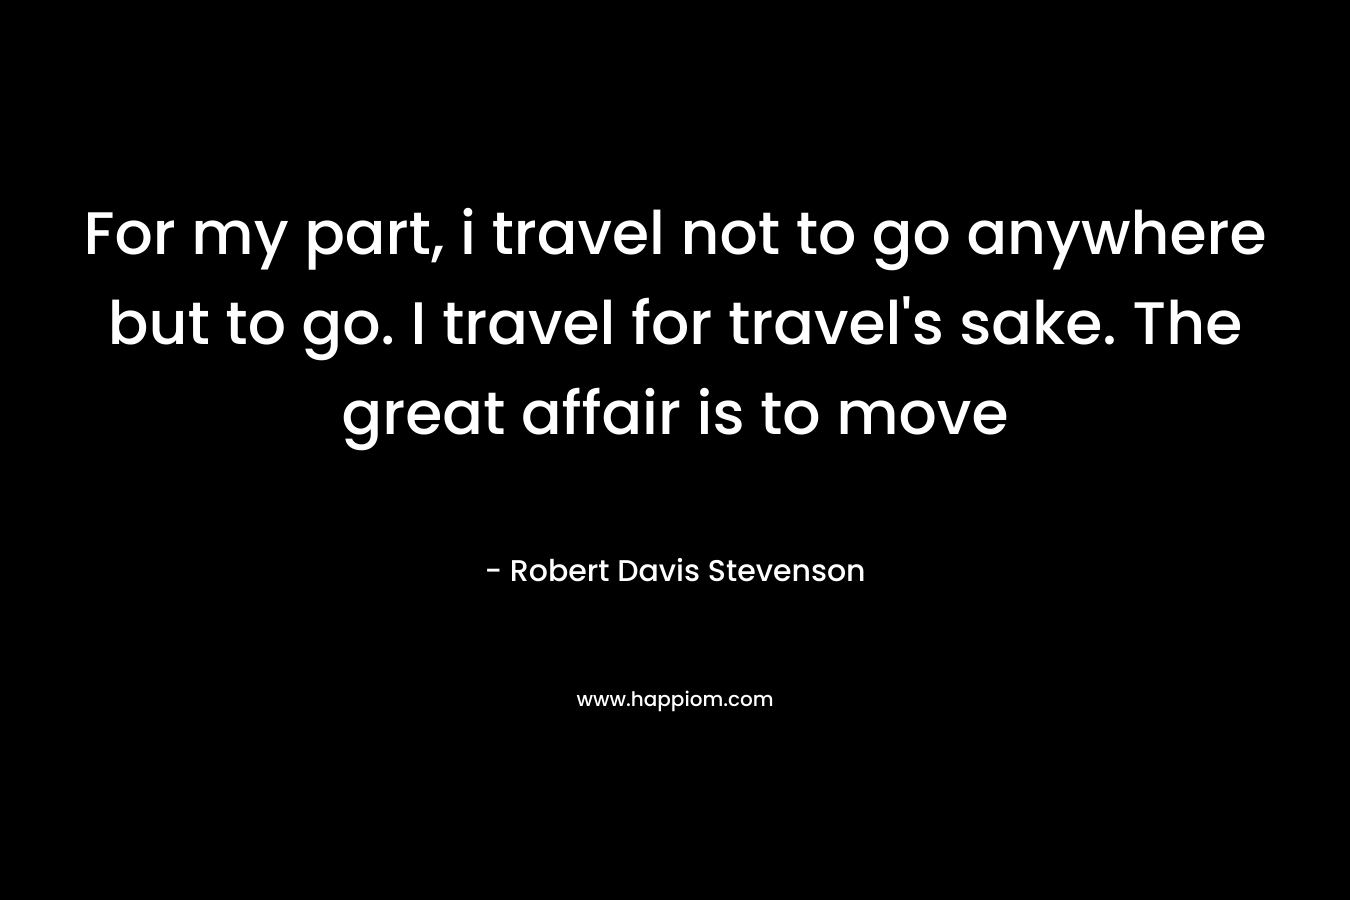 For my part, i travel not to go anywhere but to go. I travel for travel's sake. The great affair is to move